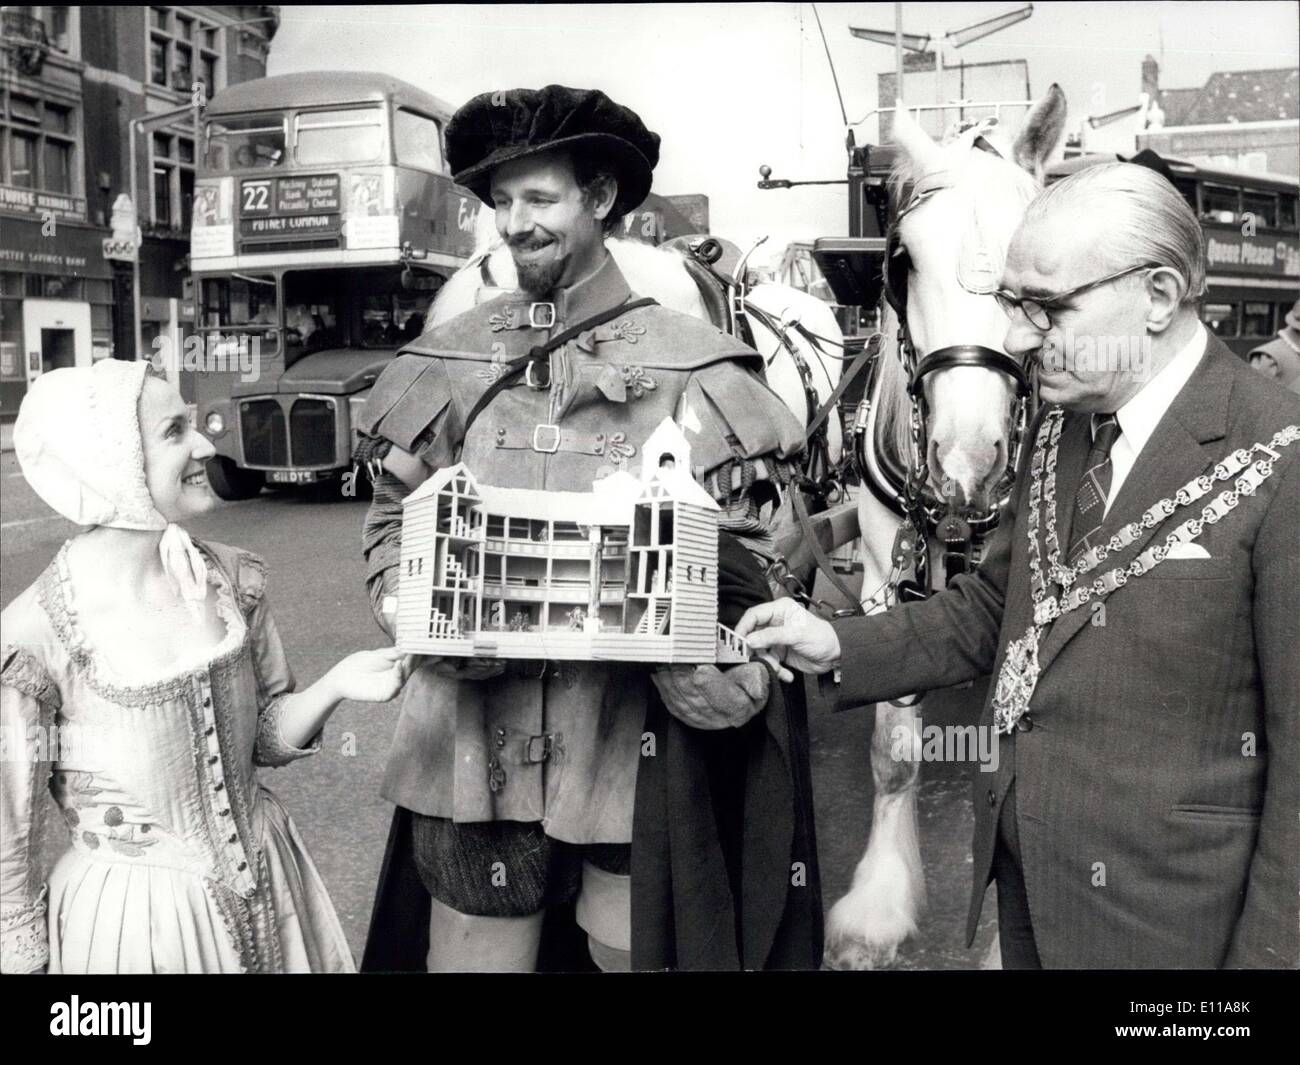 Sep. 30, 1976 - A MODEL OF BRITAIN'S FIRST THEATRE HANDED OVER TO THE MAYOR OF SOUTHWARK. PHOTO SHOWS: BARBARA DARCY and KENNETH BARRON, of the World Centre for Shakespeare Studies, receiving a model of Britain's first theatre, the original Elizabethan Globe, from Councillor GEORGE SILVER, Mayor of Hackney, before it was taken by horses drawn dray to the Globe Playhouse on London's Bankside yesterday. The model, which was been displayed at Hackney Festival exhibition, was later handed by Councillor SILVER to the Mayor of Southwark. Stock Photo